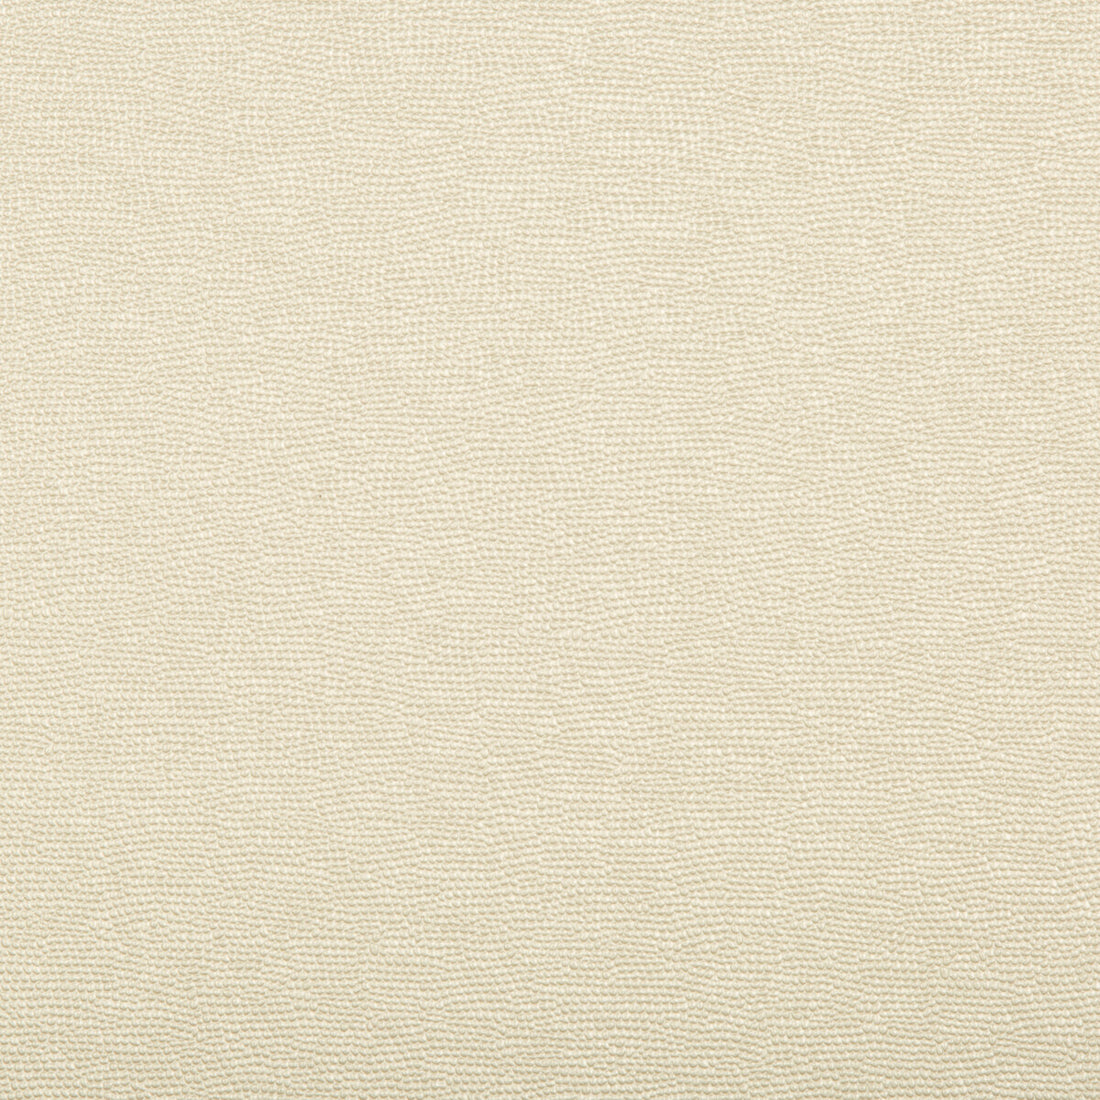 Spartan fabric in pearl color - pattern SPARTAN.1611.0 - by Kravet Contract in the Faux Leather Extreme Performance collection